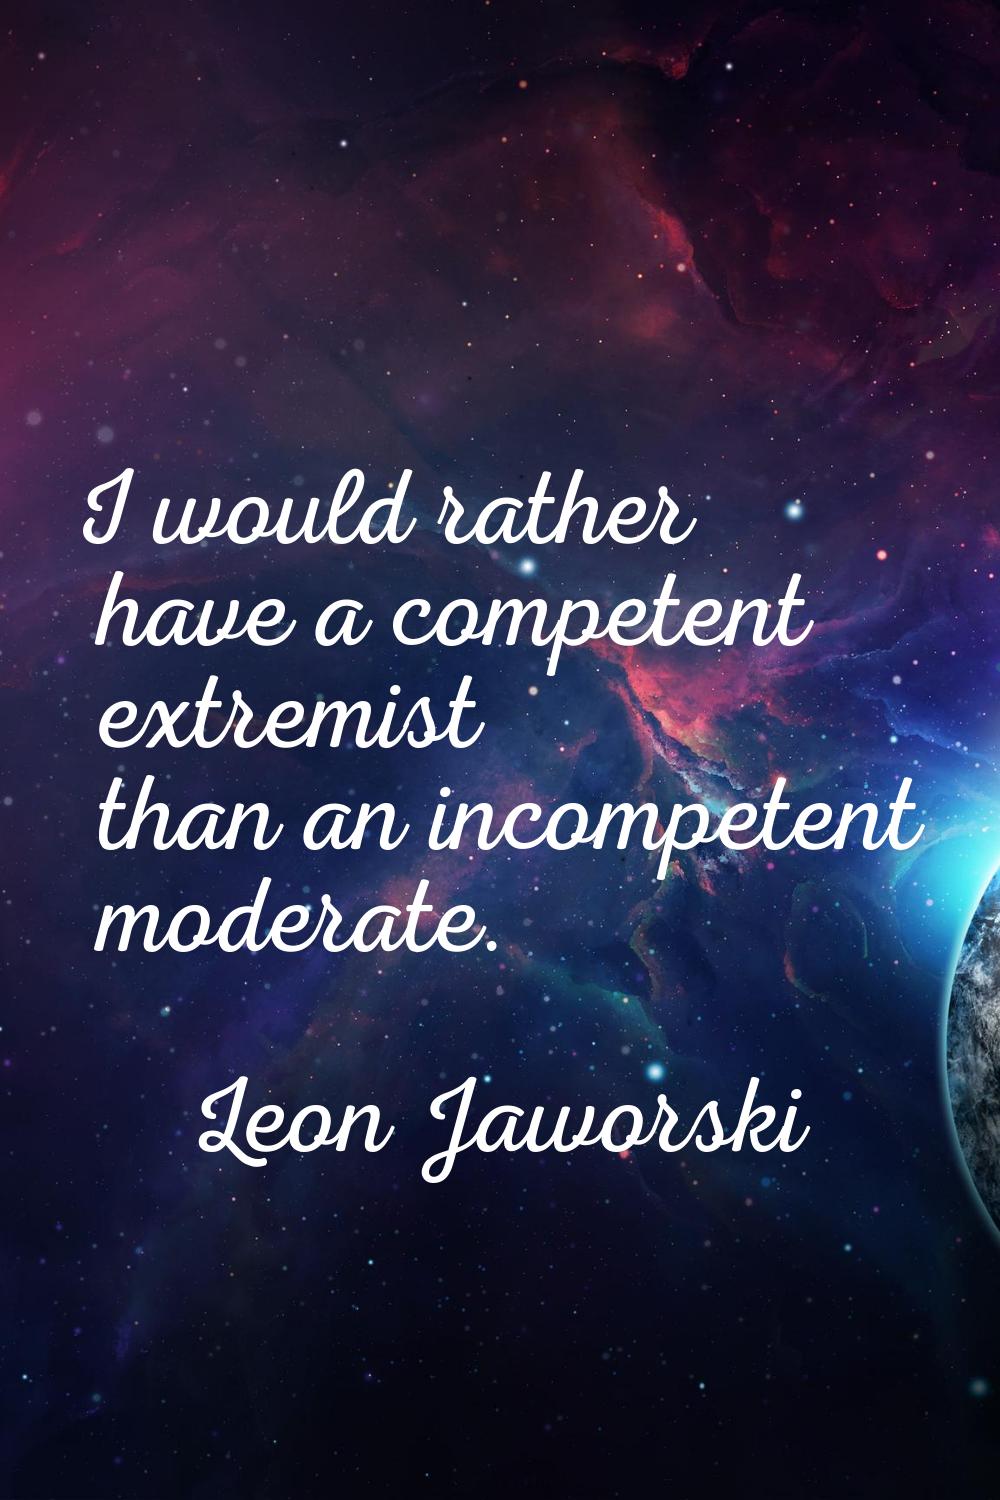 I would rather have a competent extremist than an incompetent moderate.